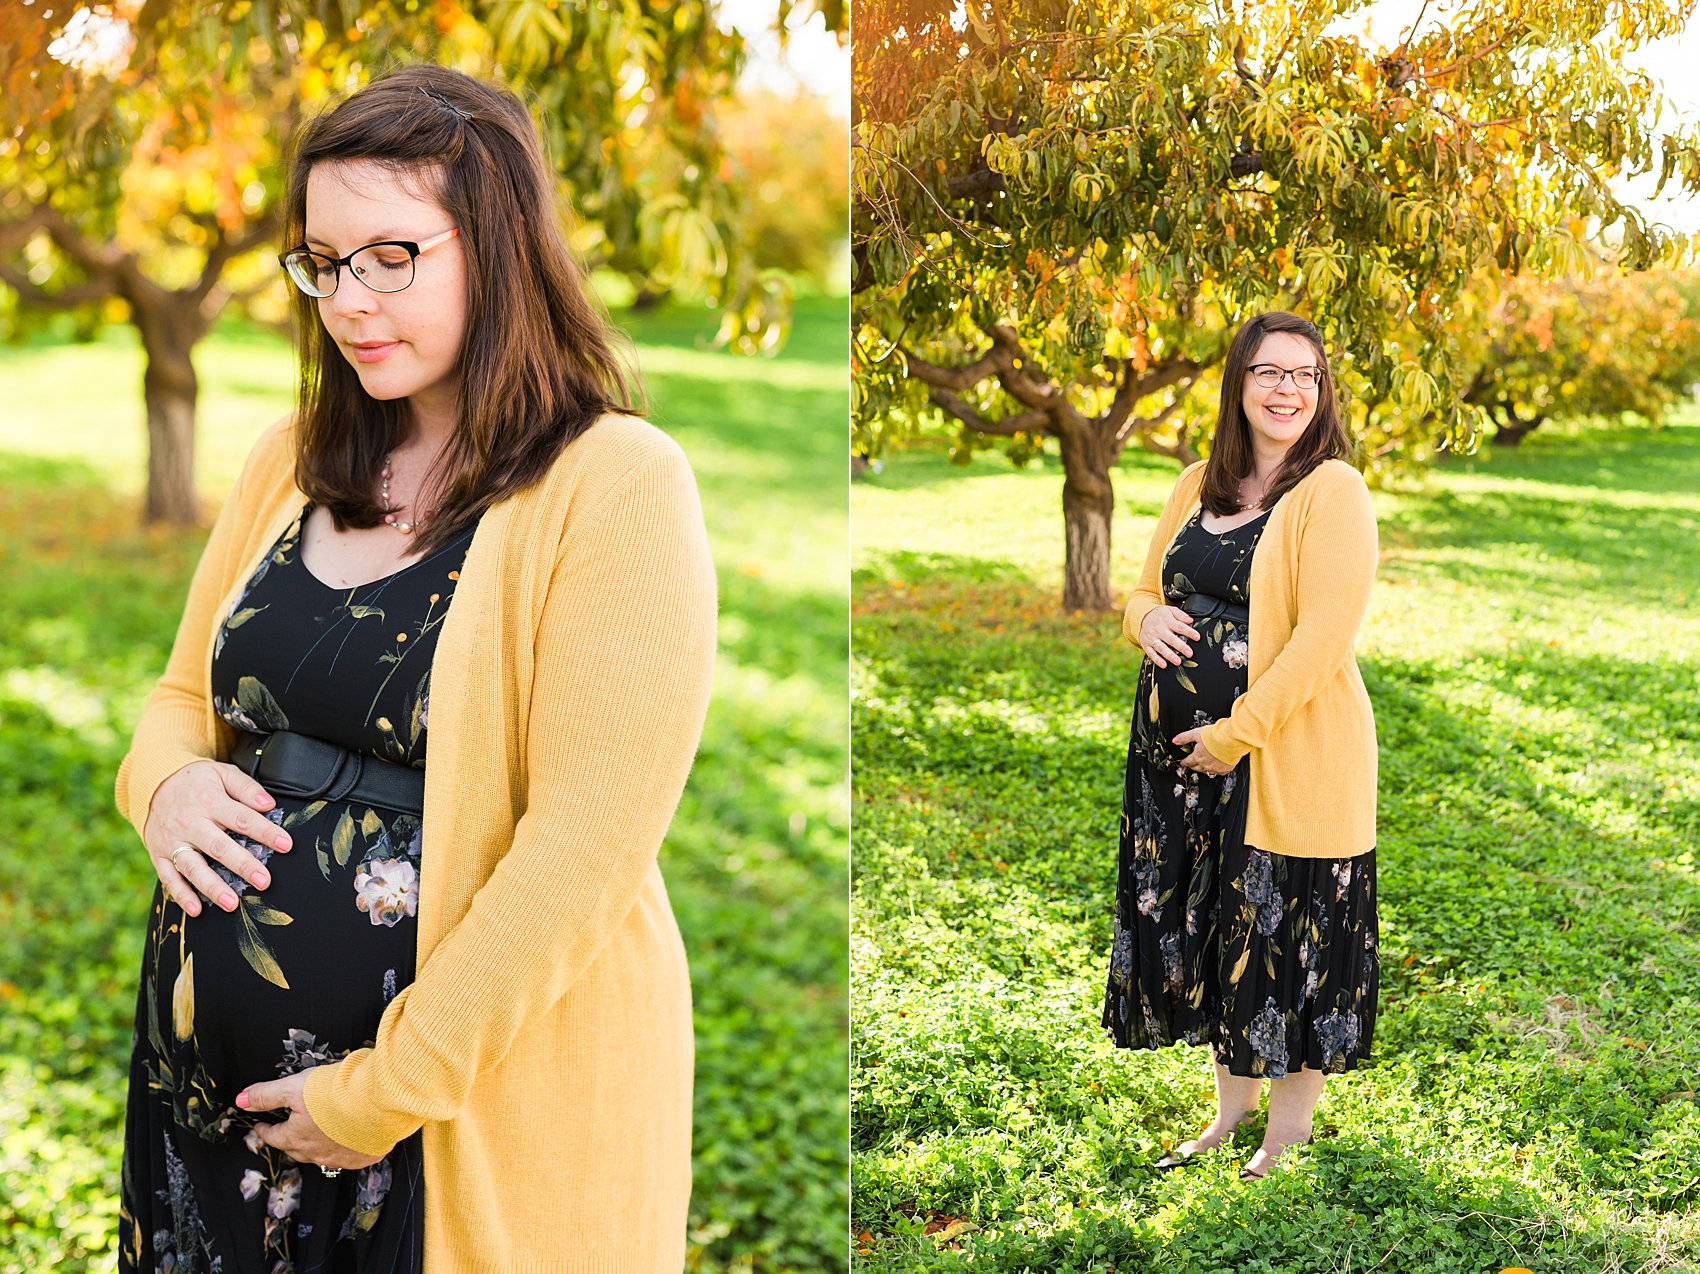 Leah Hope Photography | Phoenix Gilbert Arizona | Agritopia Green Orange Tree Orchard | Family Pictures | What to Wear | Family Photos Poses | Maternity Pregnancy Bump Photos